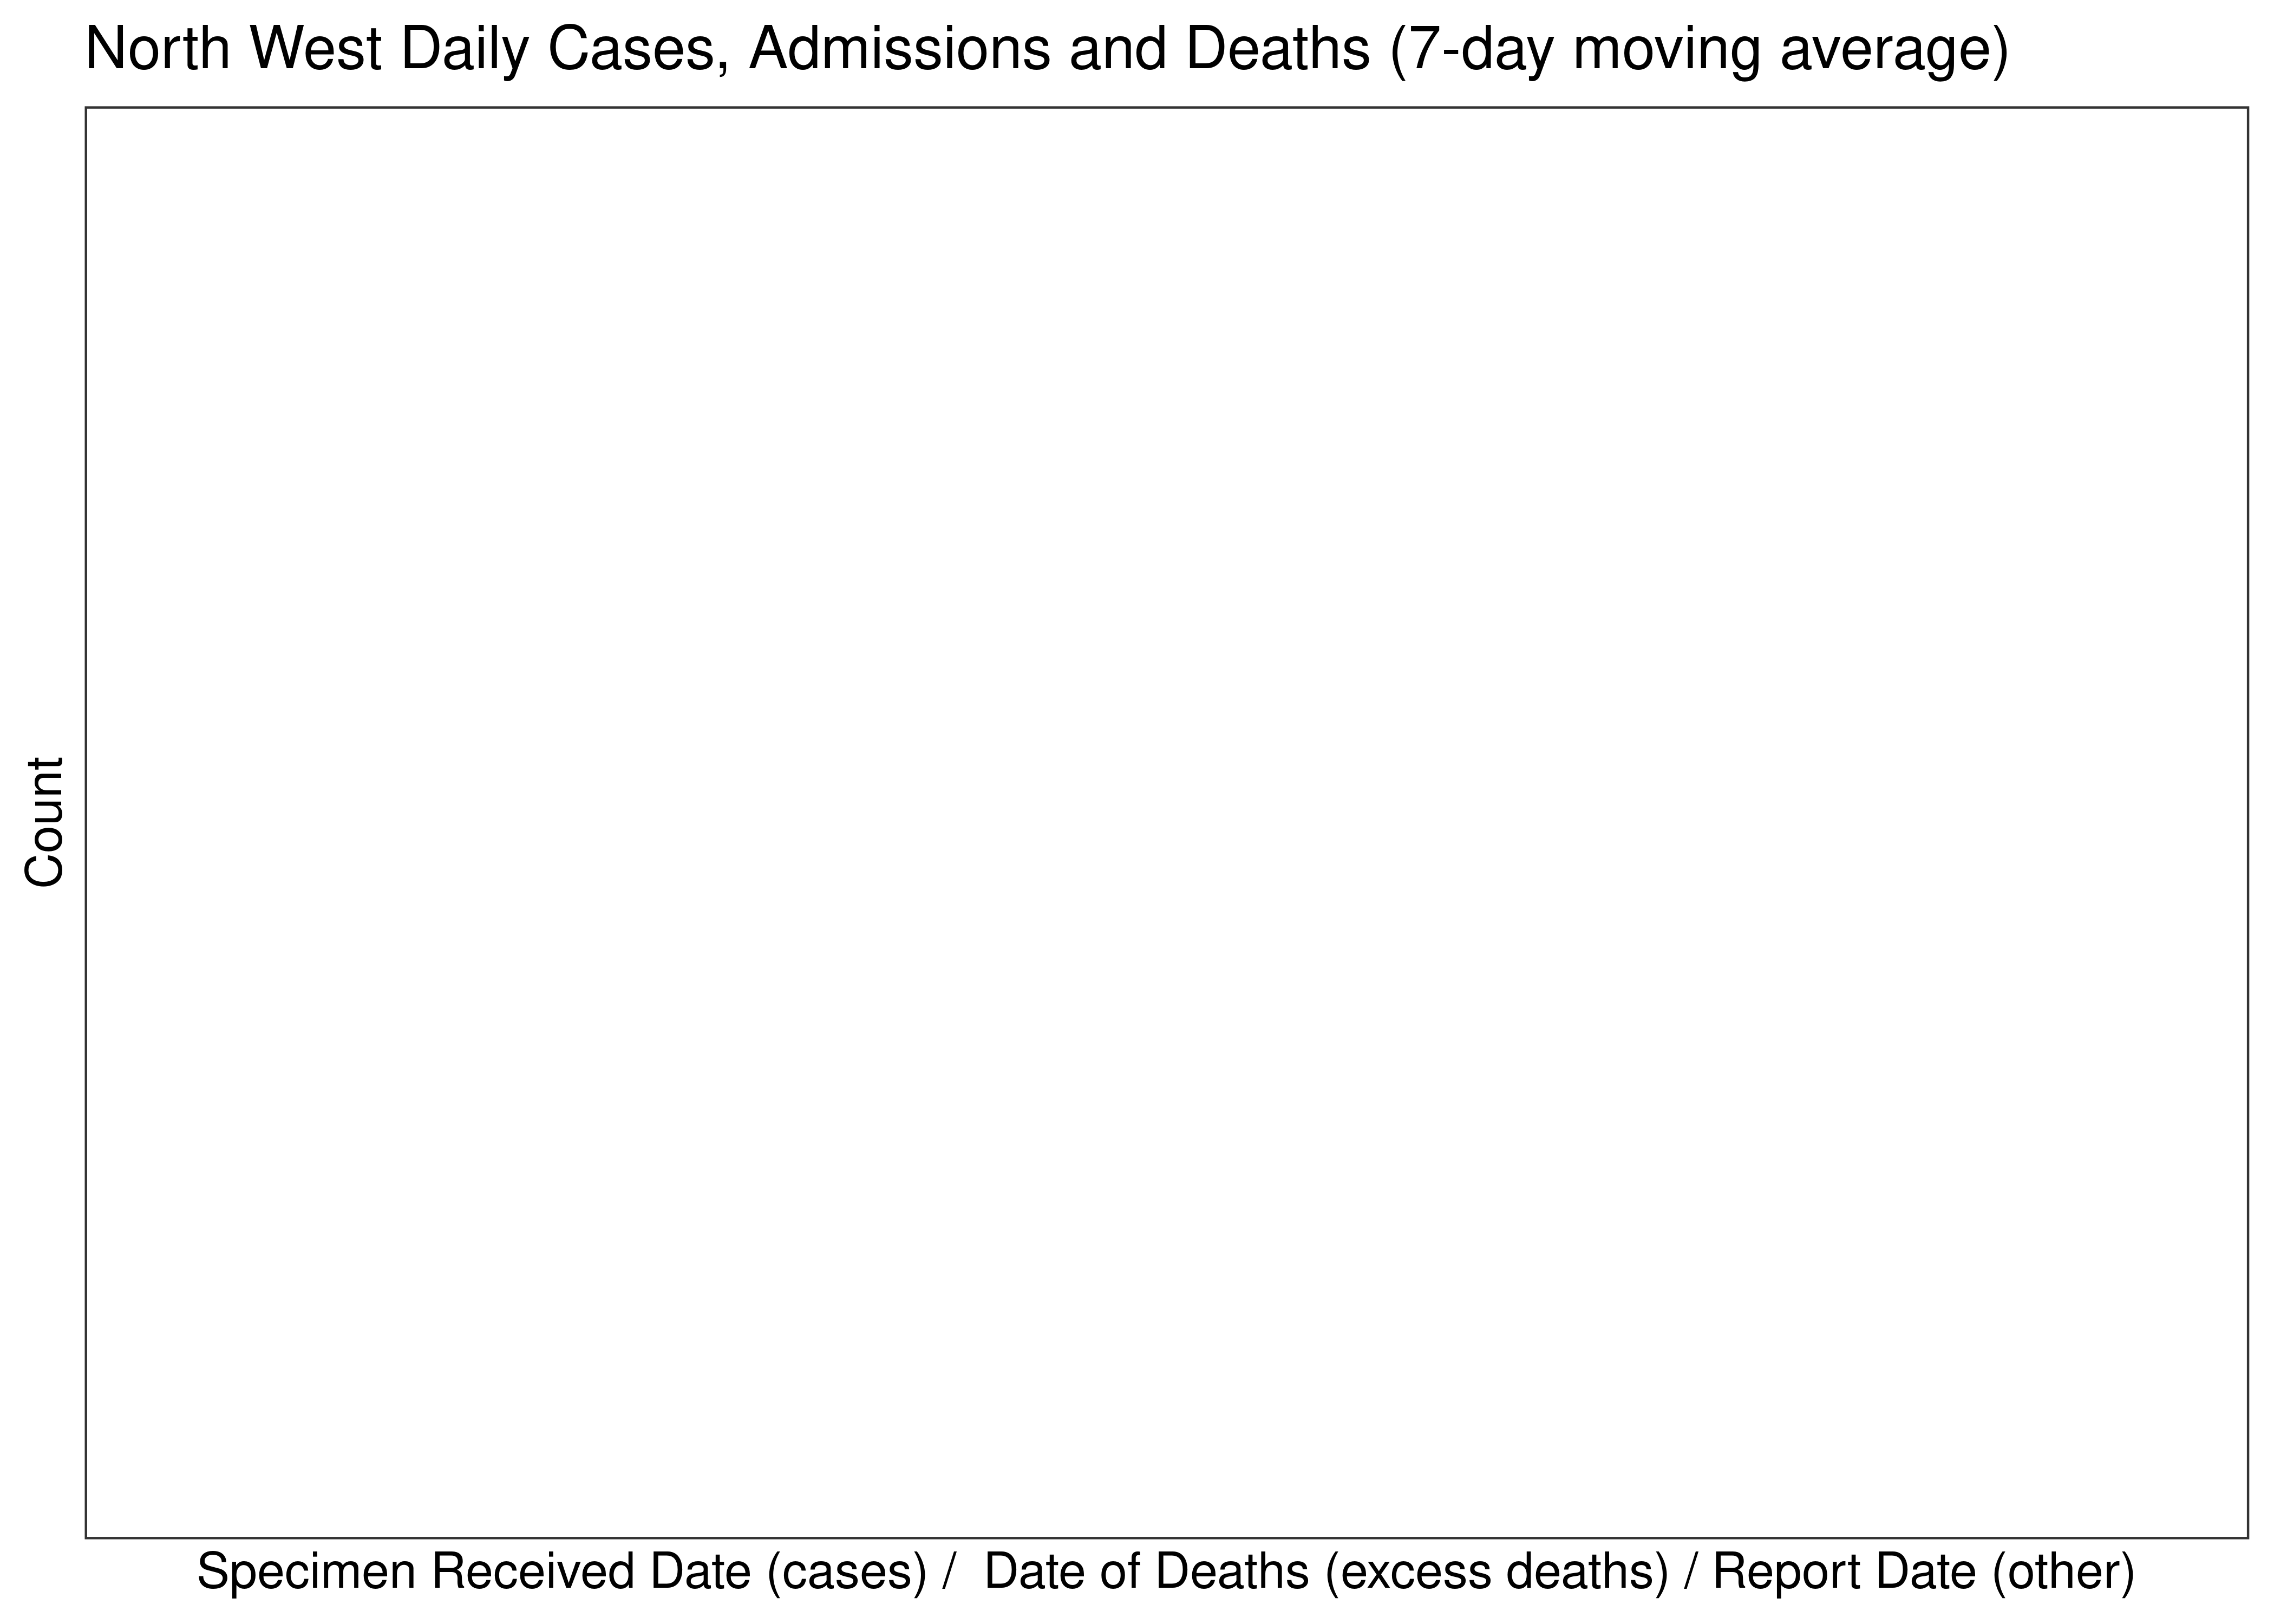 North West Daily Cases, Admissions and Deaths for Last 30-days (7-day moving average)